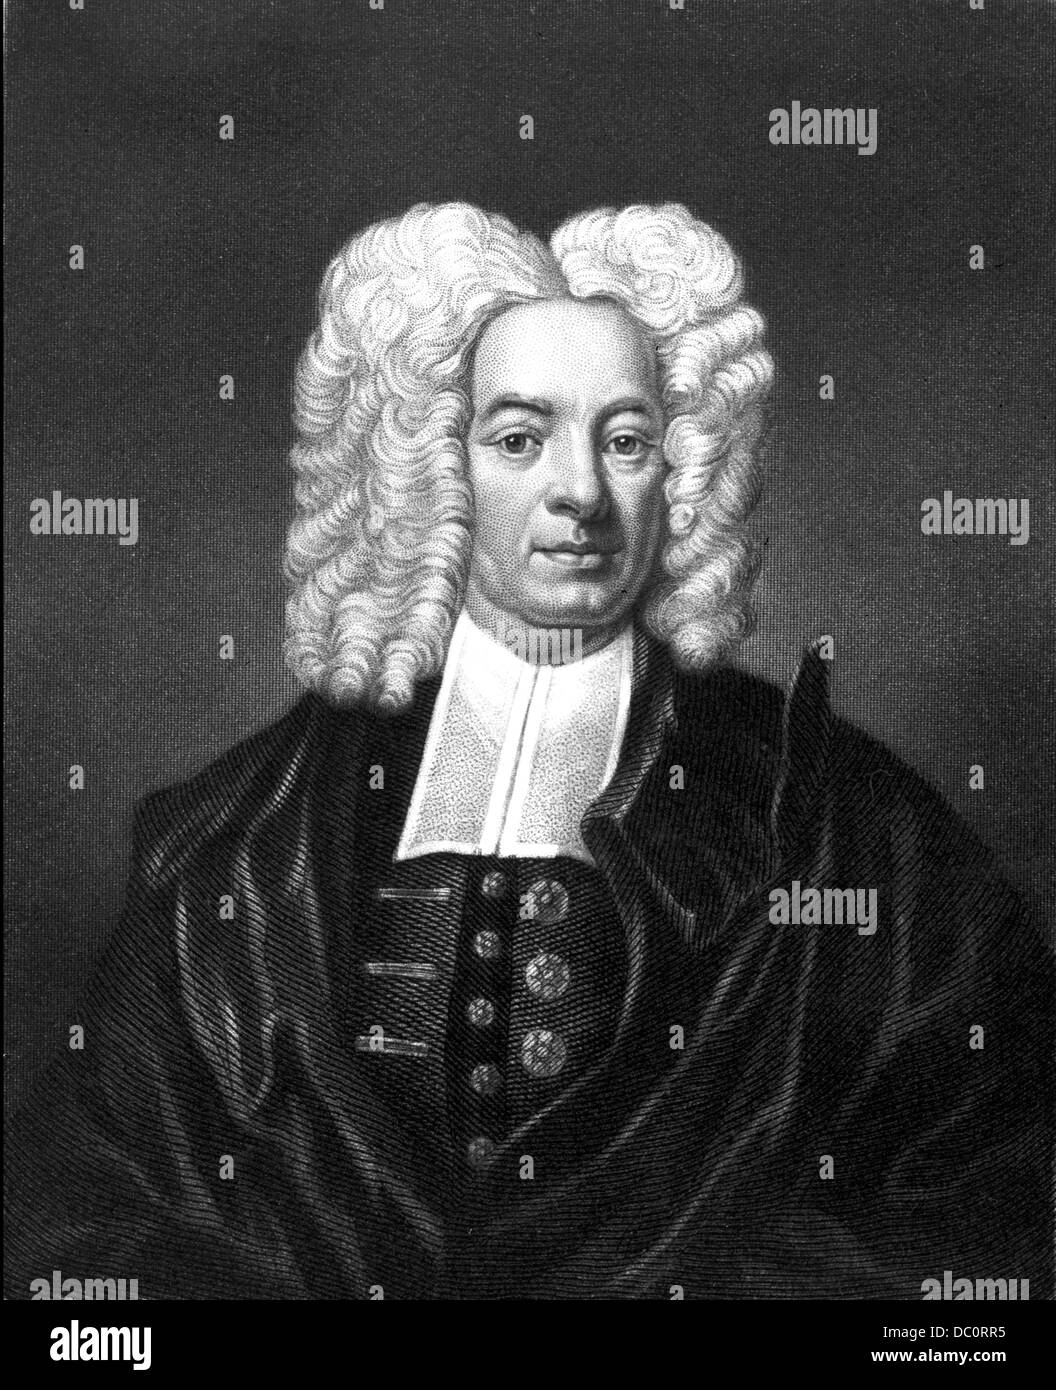 1600s COTTON MATHER NEW ENGLAND PURITAN MINISTER WRITER WHO ACTED AS JUDGE IN SALEM WITCH TRIALS OF 1692 LOOKING AT CAMERA Stock Photo